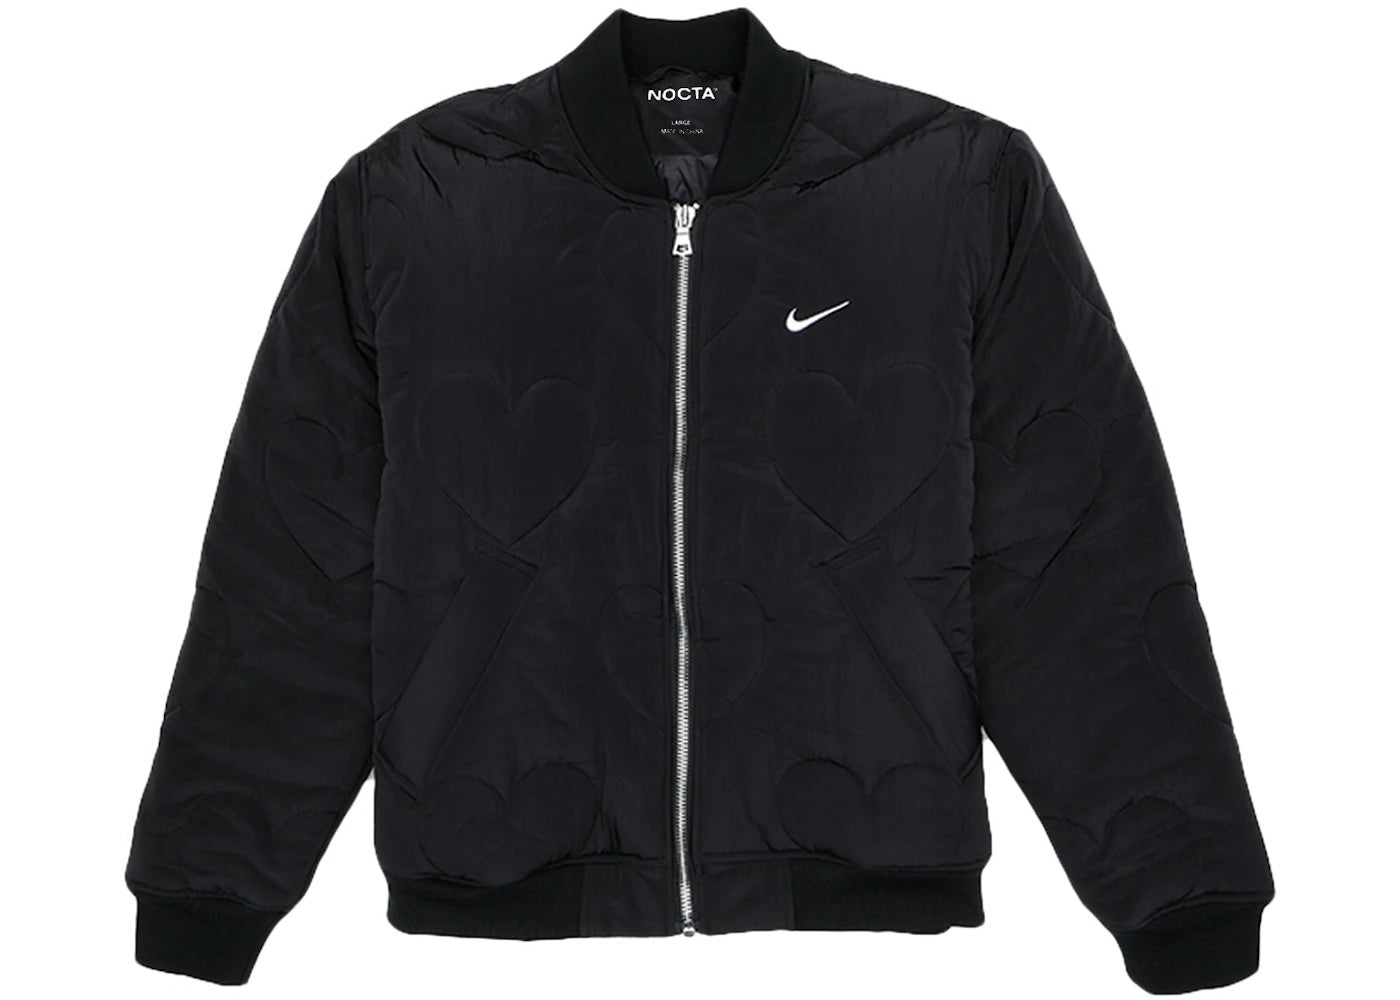 Nike x Drake Certified Lover Boy Bomber Jacket (Friends and Family)